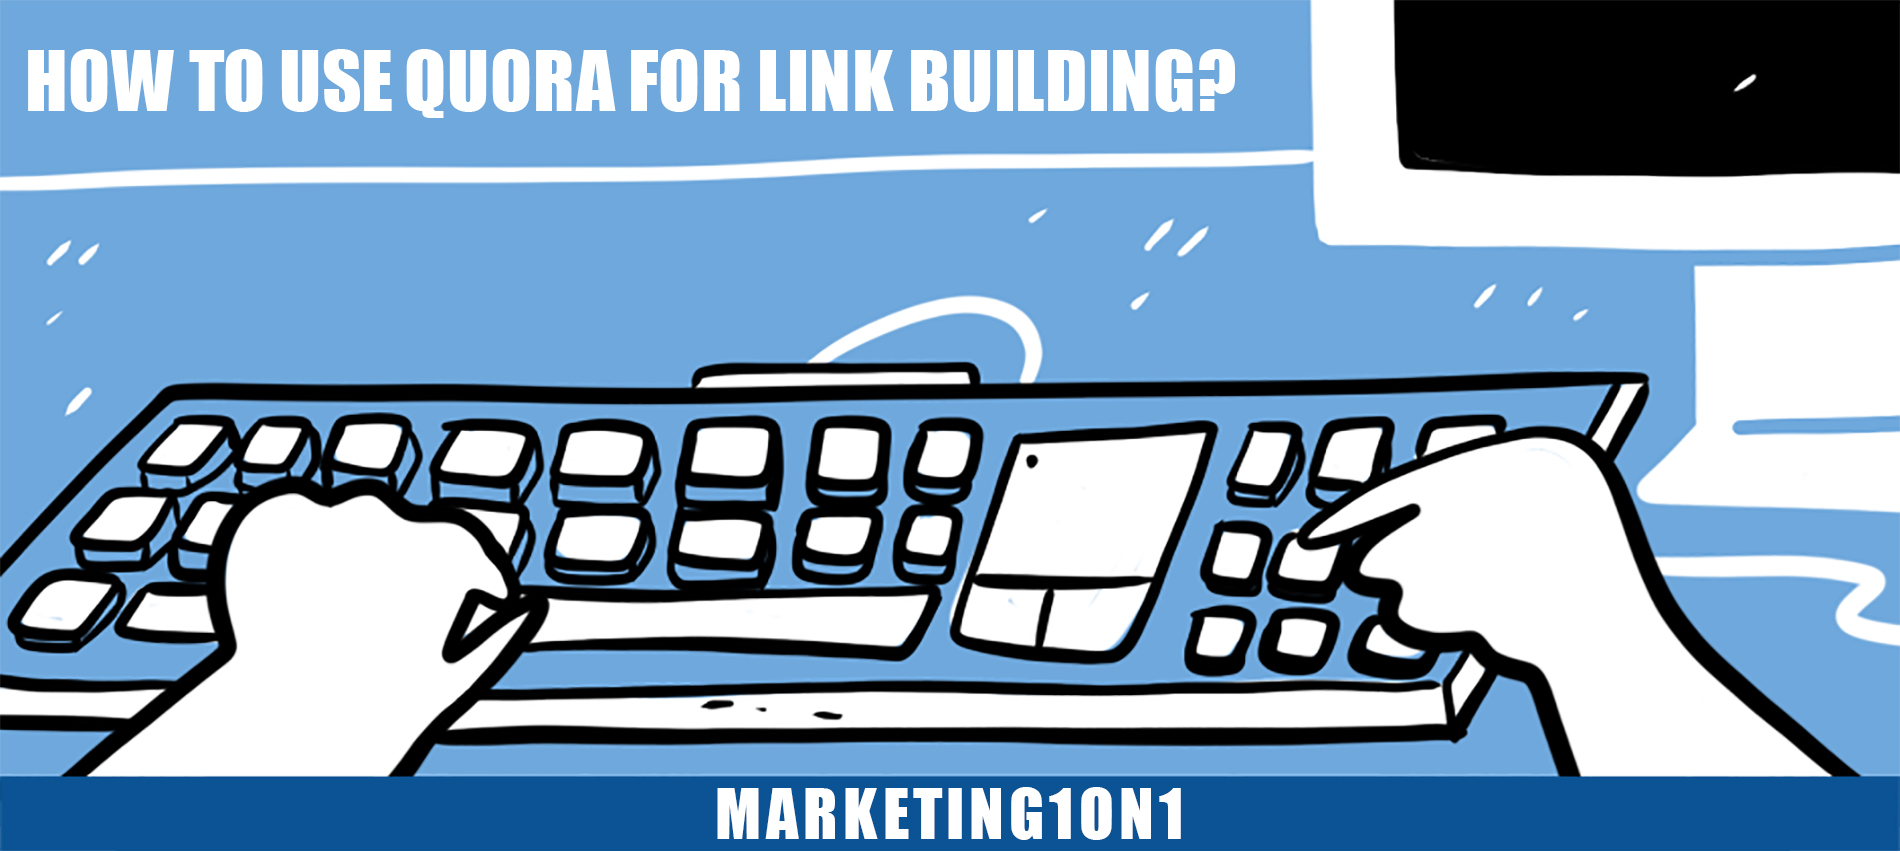 How to use Quora for link building?